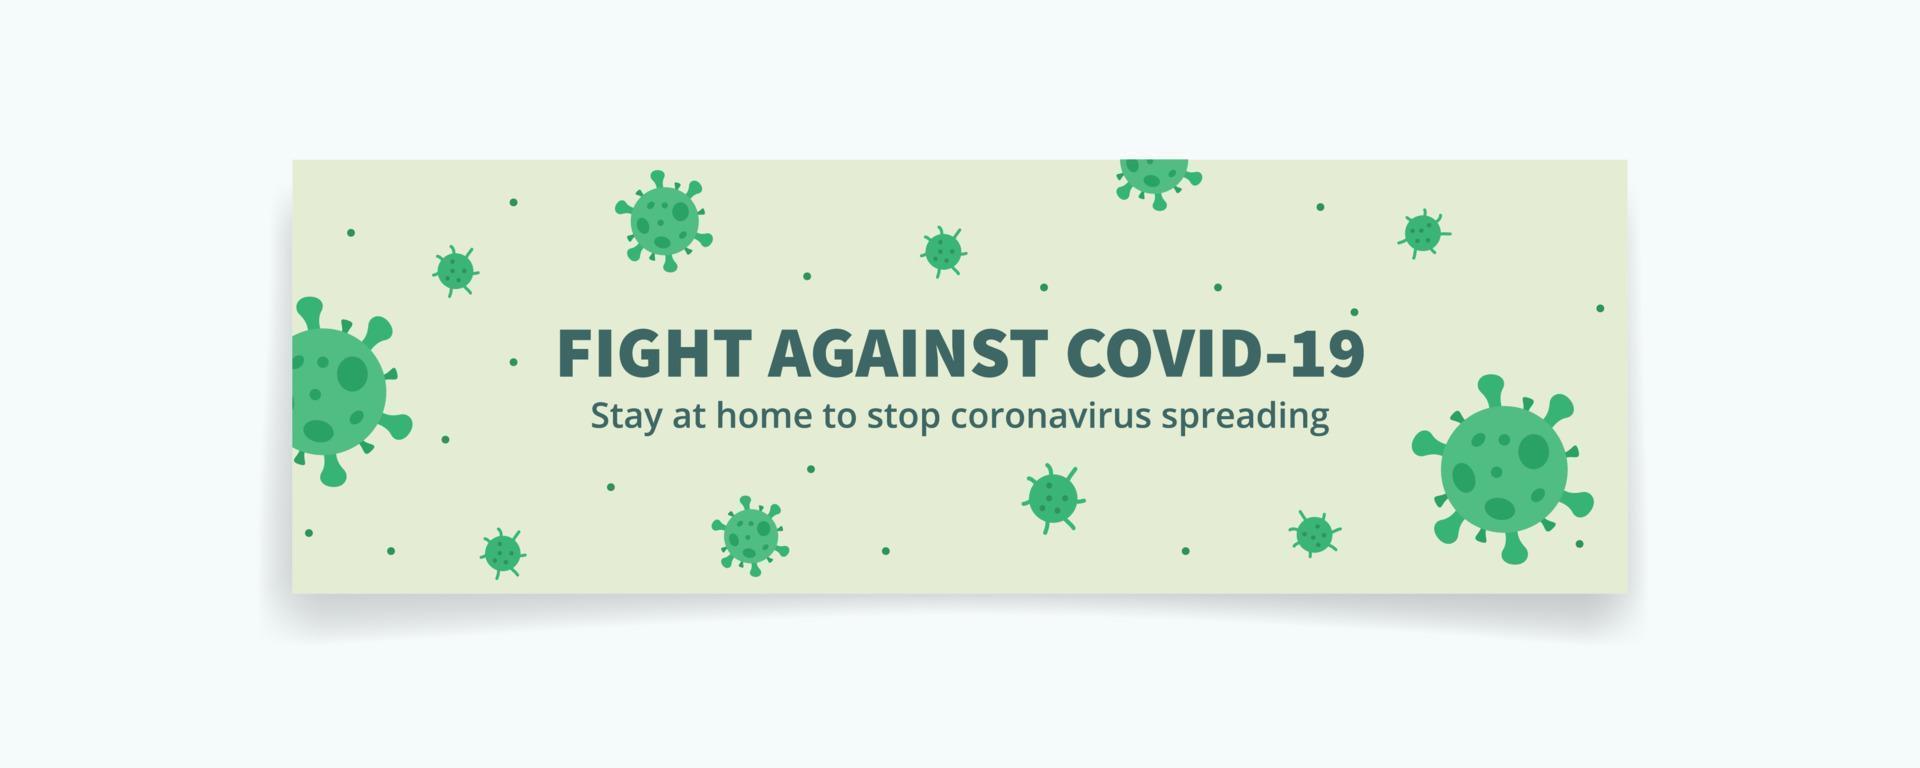 fight against corona virus covid-19 website template banner concept with green theme color vector